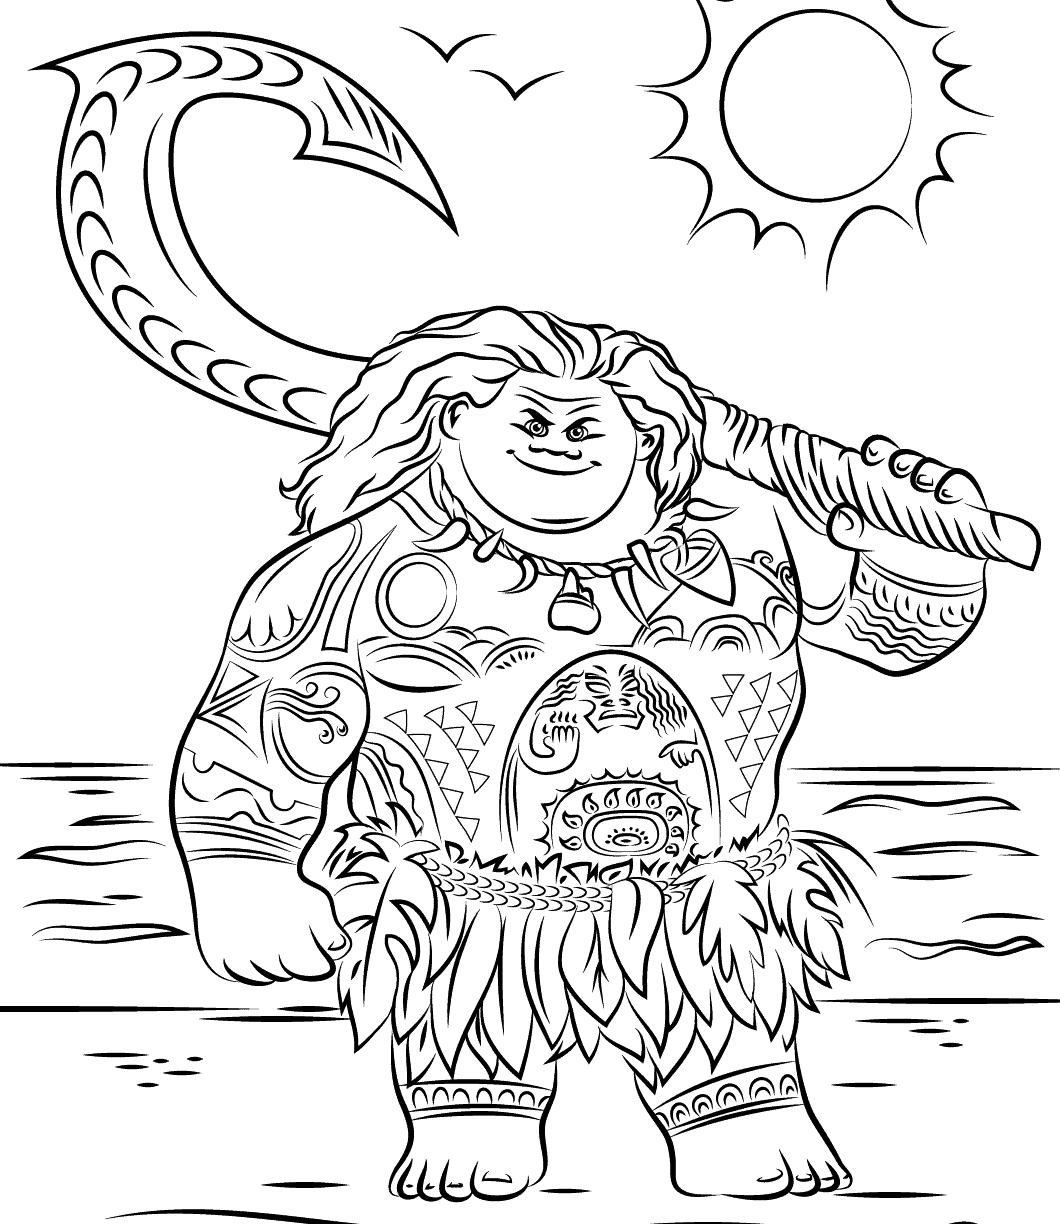 Moana Coloring Pages To Print At GetDrawings Free Download